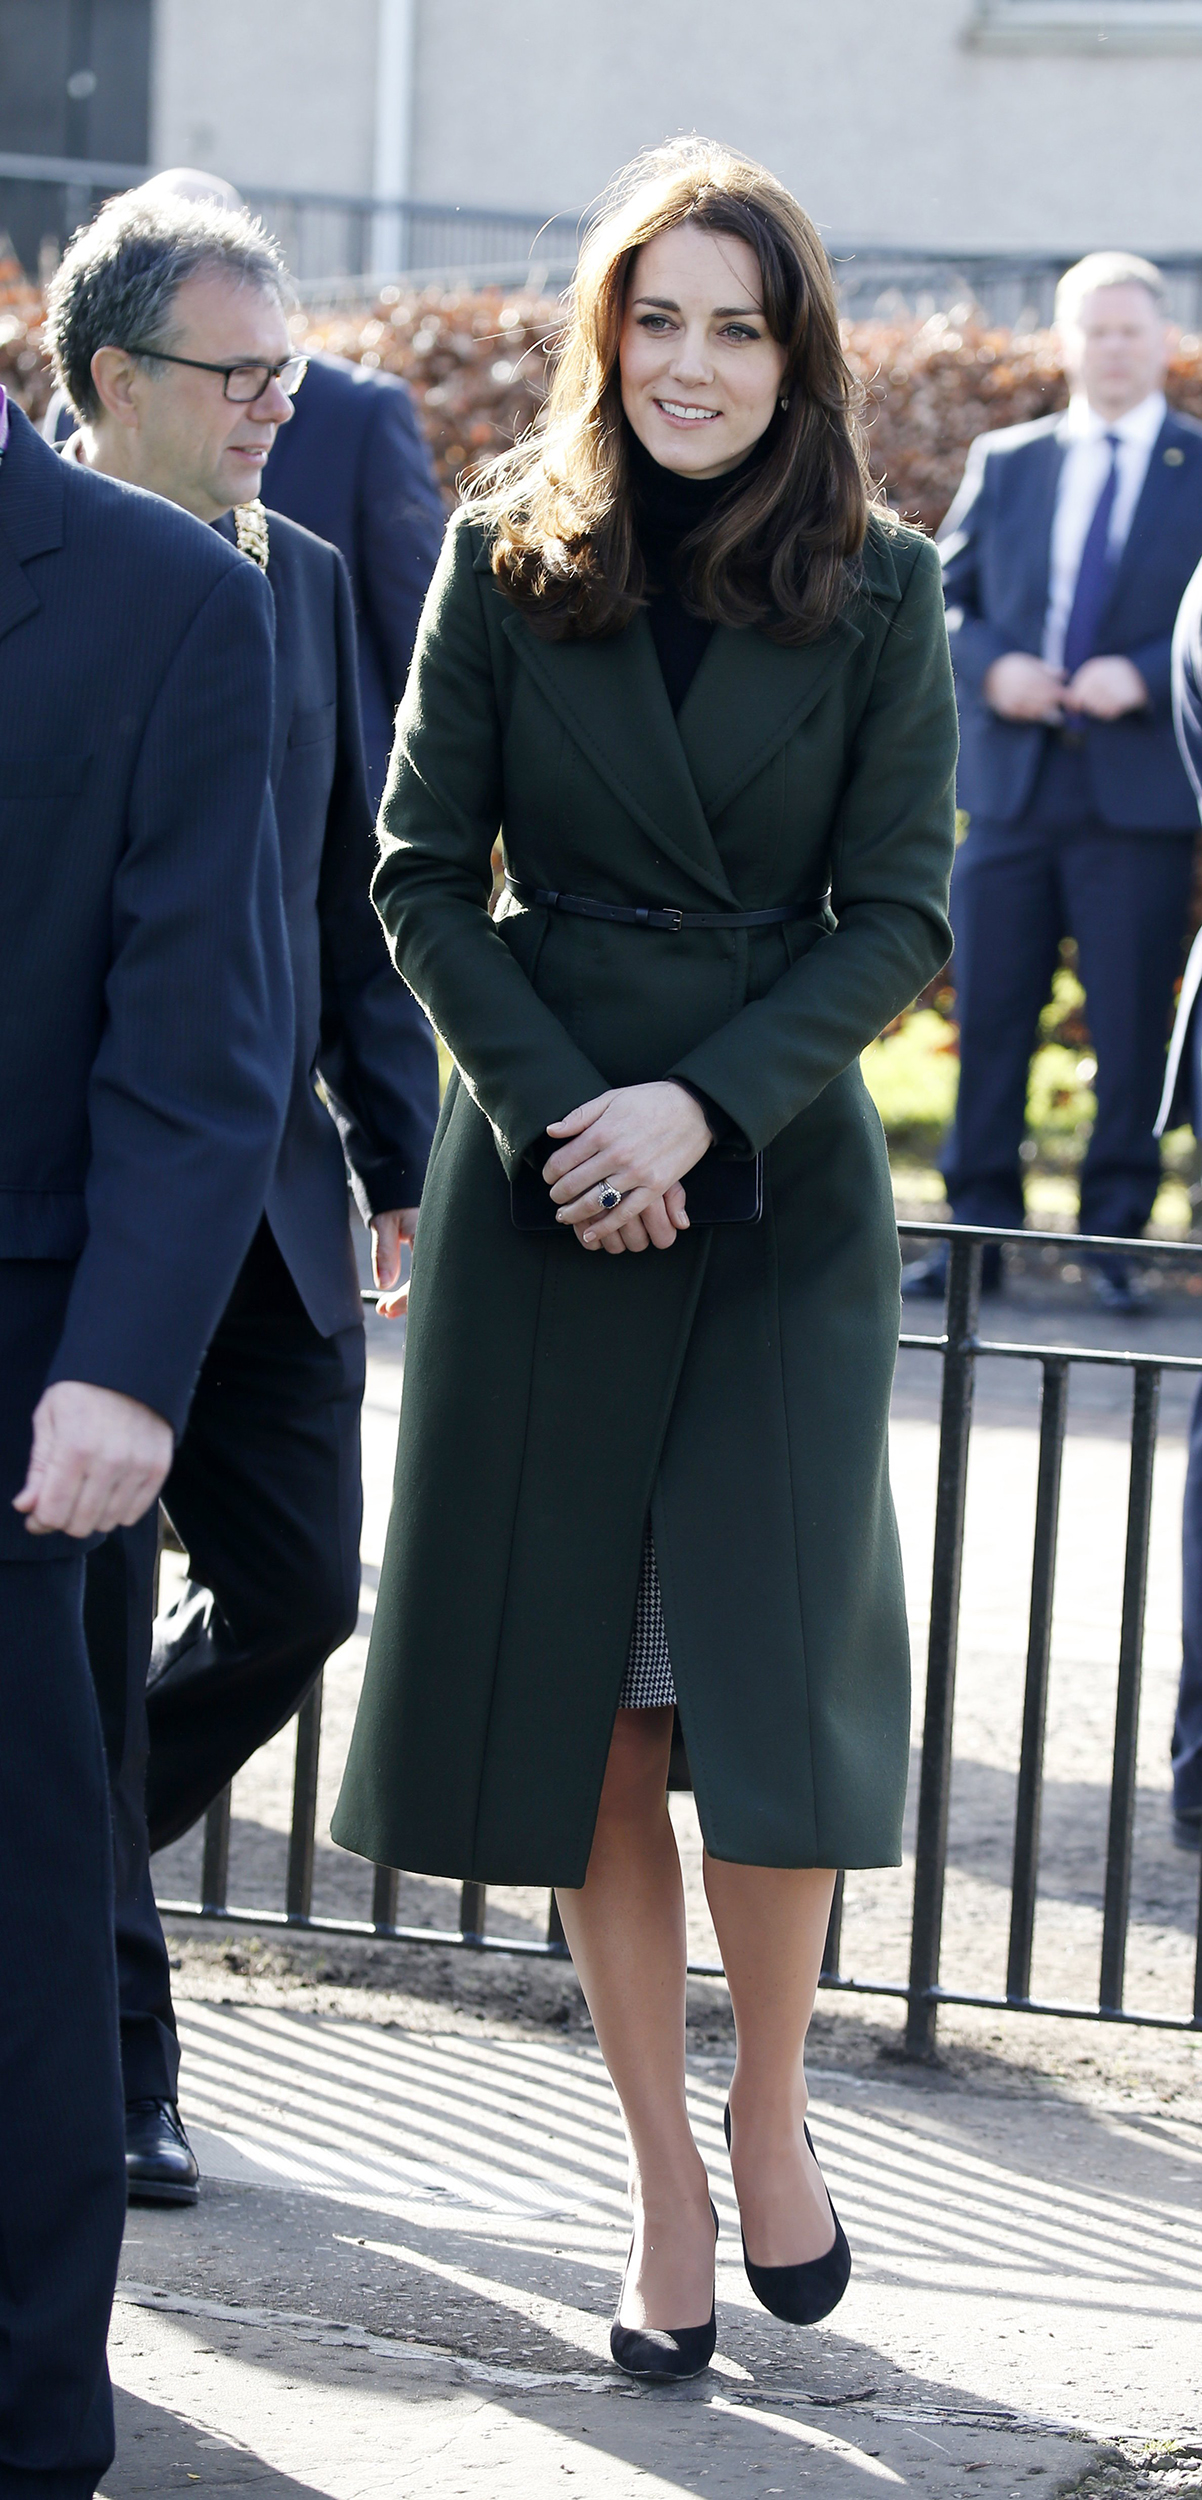 Duchess Kate Middleton visits three school-based charity projects in Edinburgh, Scotland on Feb. 24, 2016. One being St Catherine's Primary School, in hopes to see some of Scotland's charity work and to help improve the emotional well-being of pupils, parents, families and school staff.